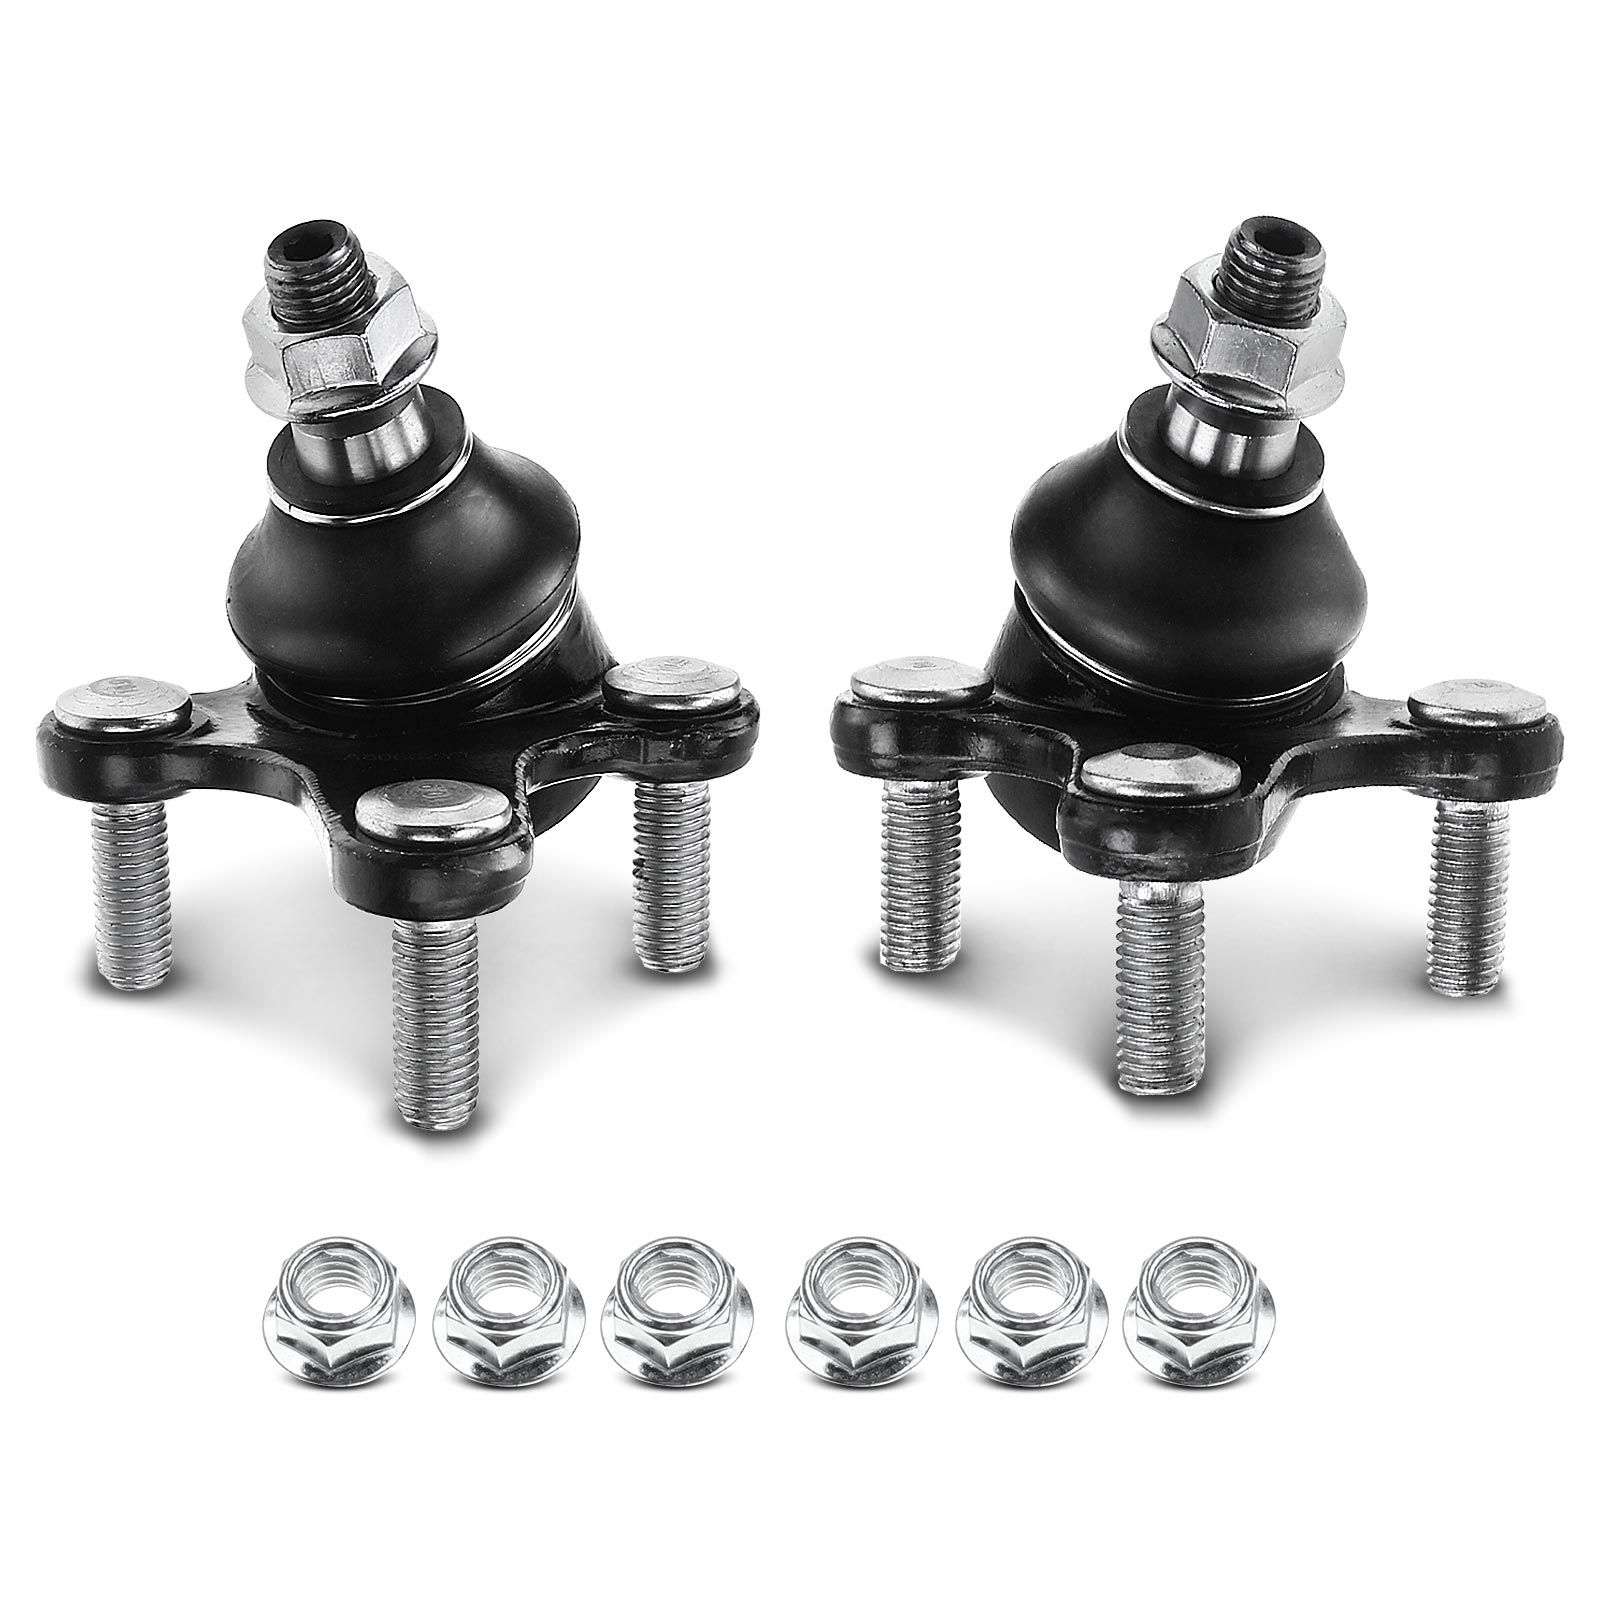 2 Pcs Front Lower Ball Joint for Audi A3 Q3 Quattro VW Beetle Jetta Golf